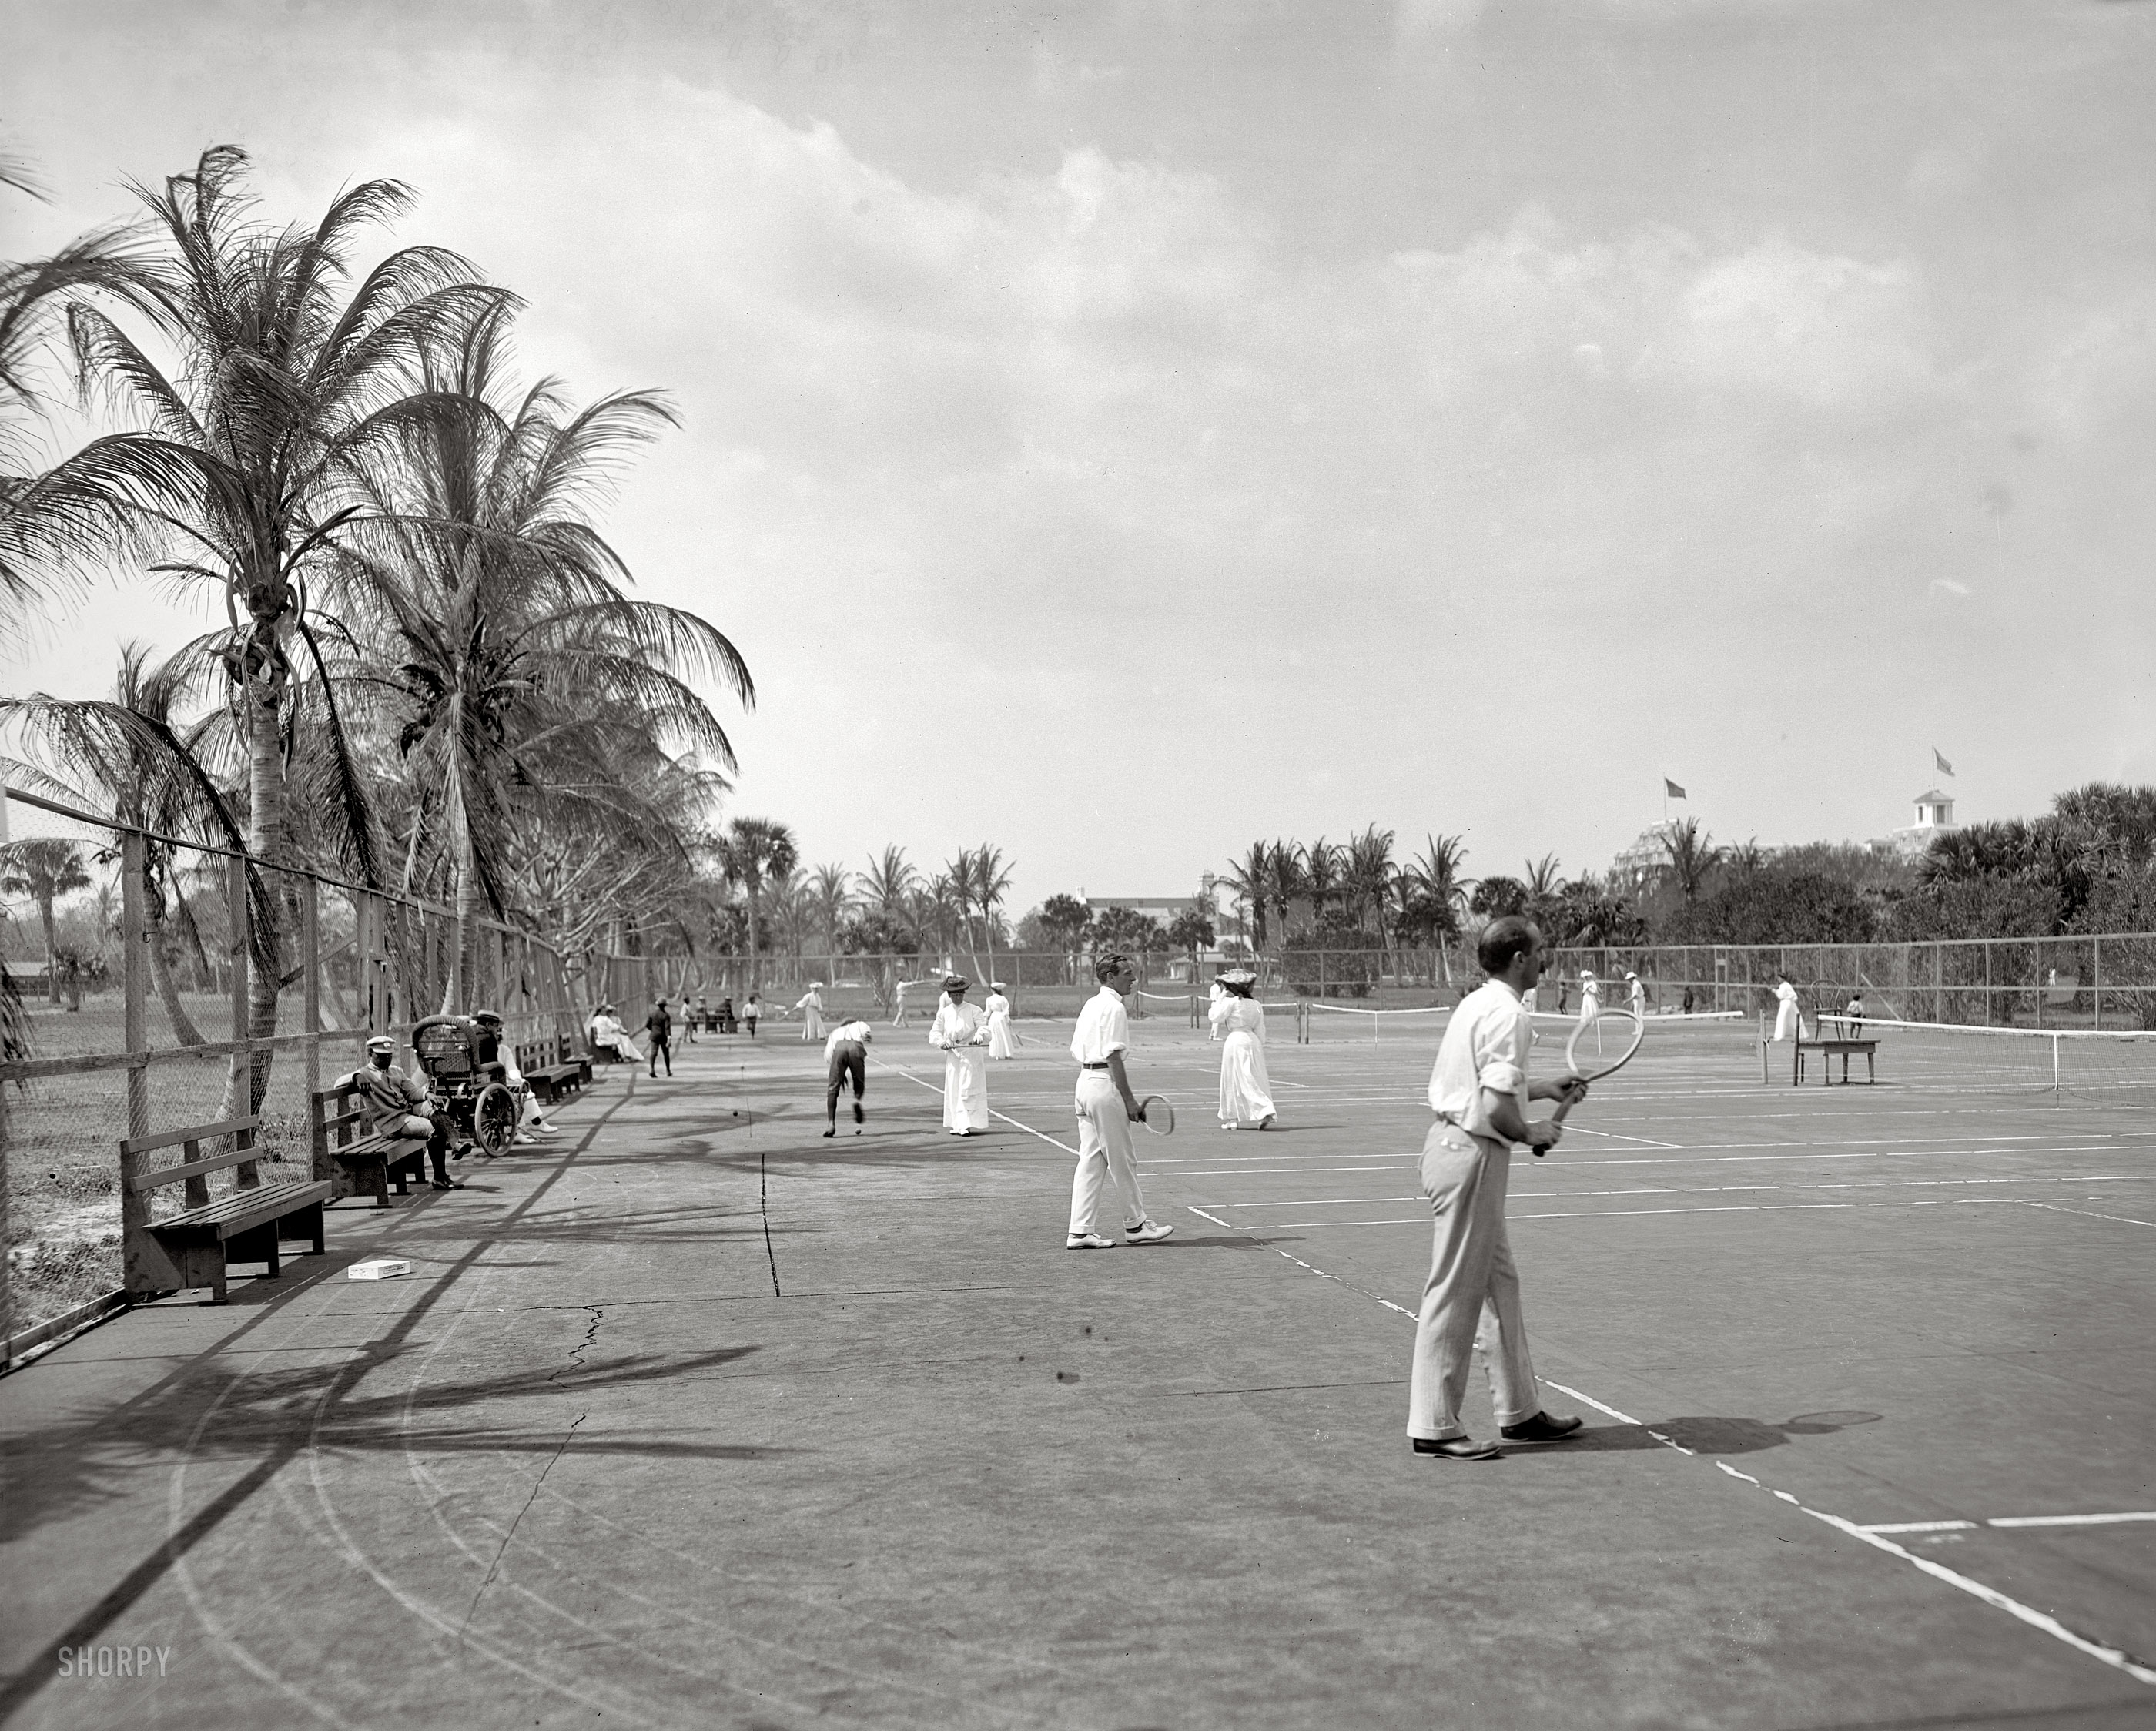 Florida circa 1905. "Tennis courts at Palm Beach." 8x10 inch dry plate glass negative, Detroit Publishing Company. View full size.